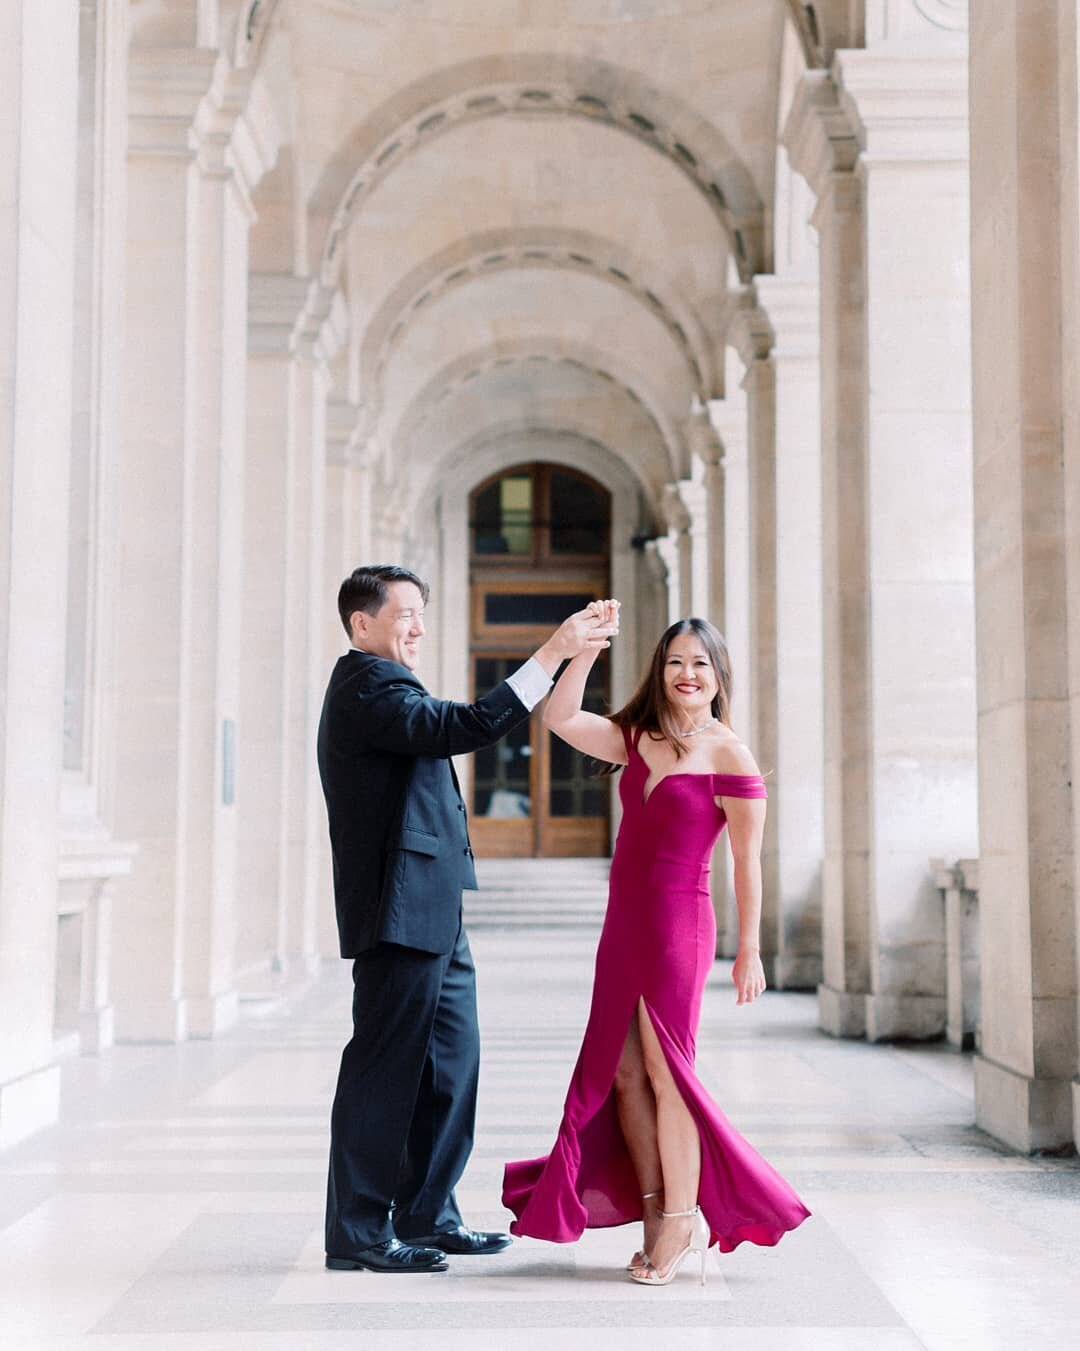 The Louvre Museum corridors make excellent dancefloors! Cheers to Tiffany and Dave, our wonderful and joyful couple from Hawaii!
.
#timmoore_lovestory
.
.
#parisphotographer #pariscorner #danceme #twirling #couple #hawaii #paris #france #louvre #arch